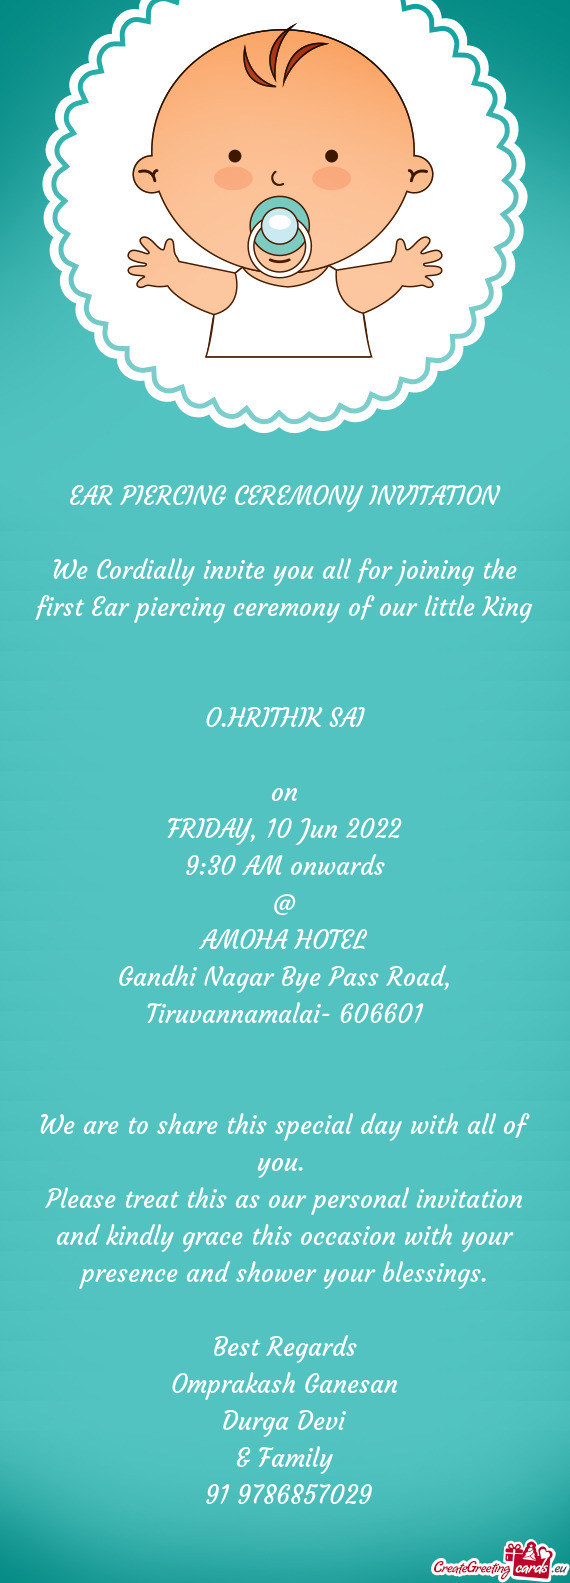 We Cordially invite you all for joining the first Ear piercing ceremony of our little King